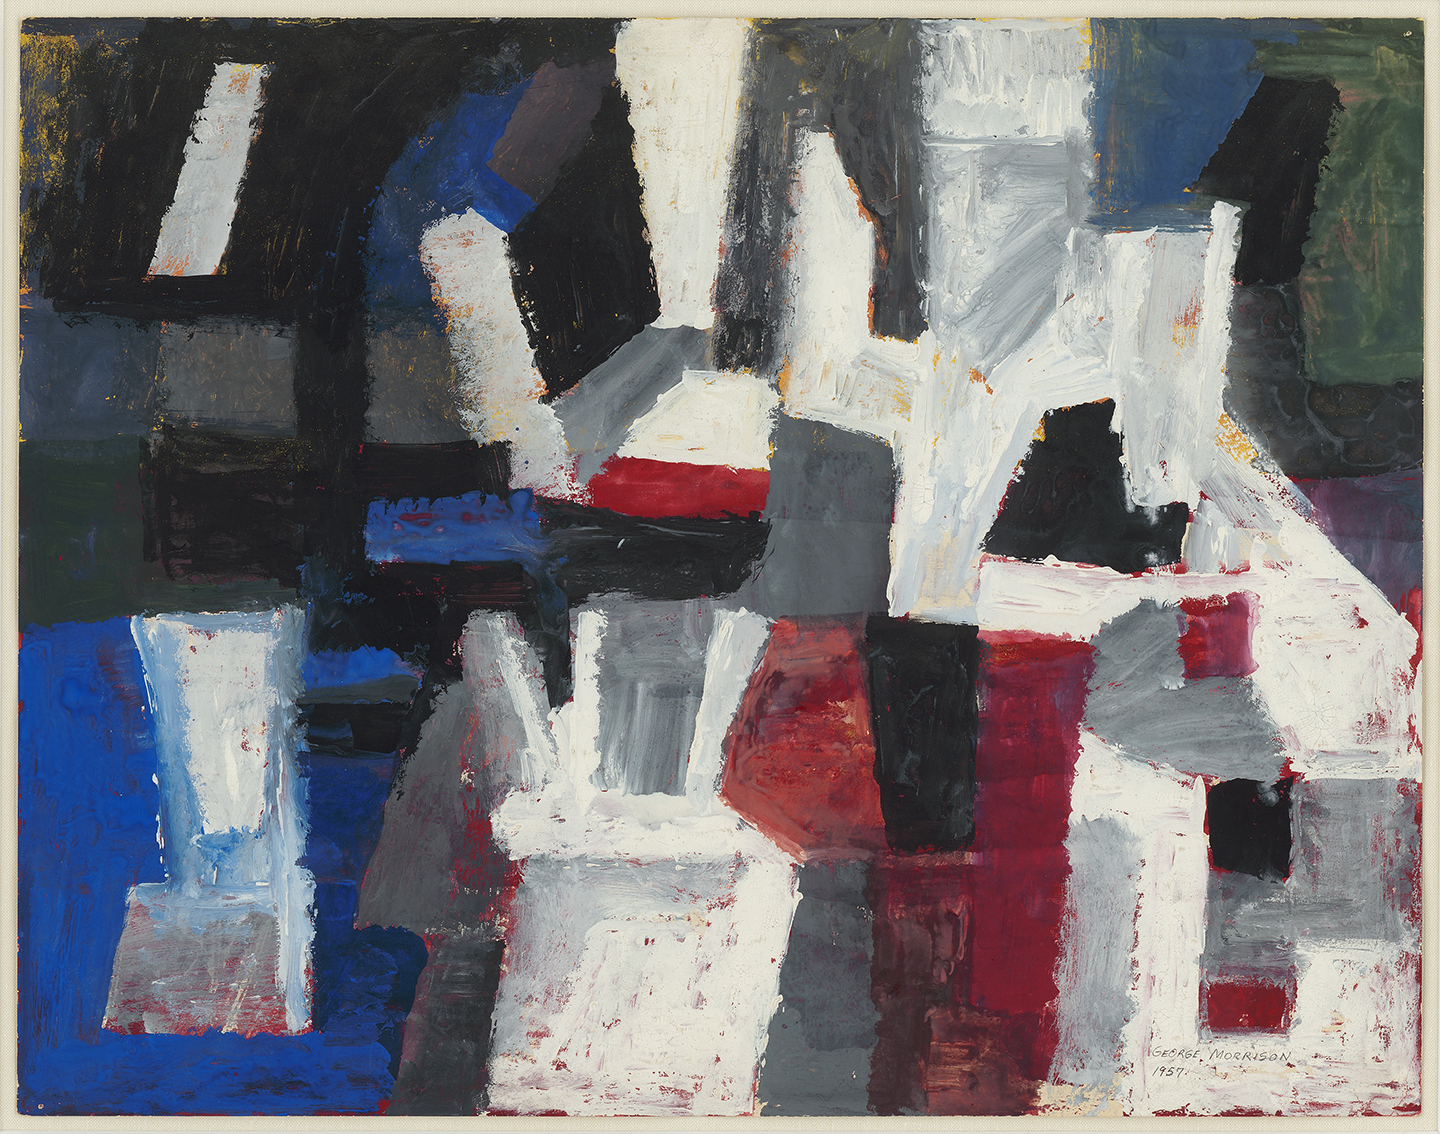 Untitled, 1957 mixed media on paper 17.5 x 22 inches